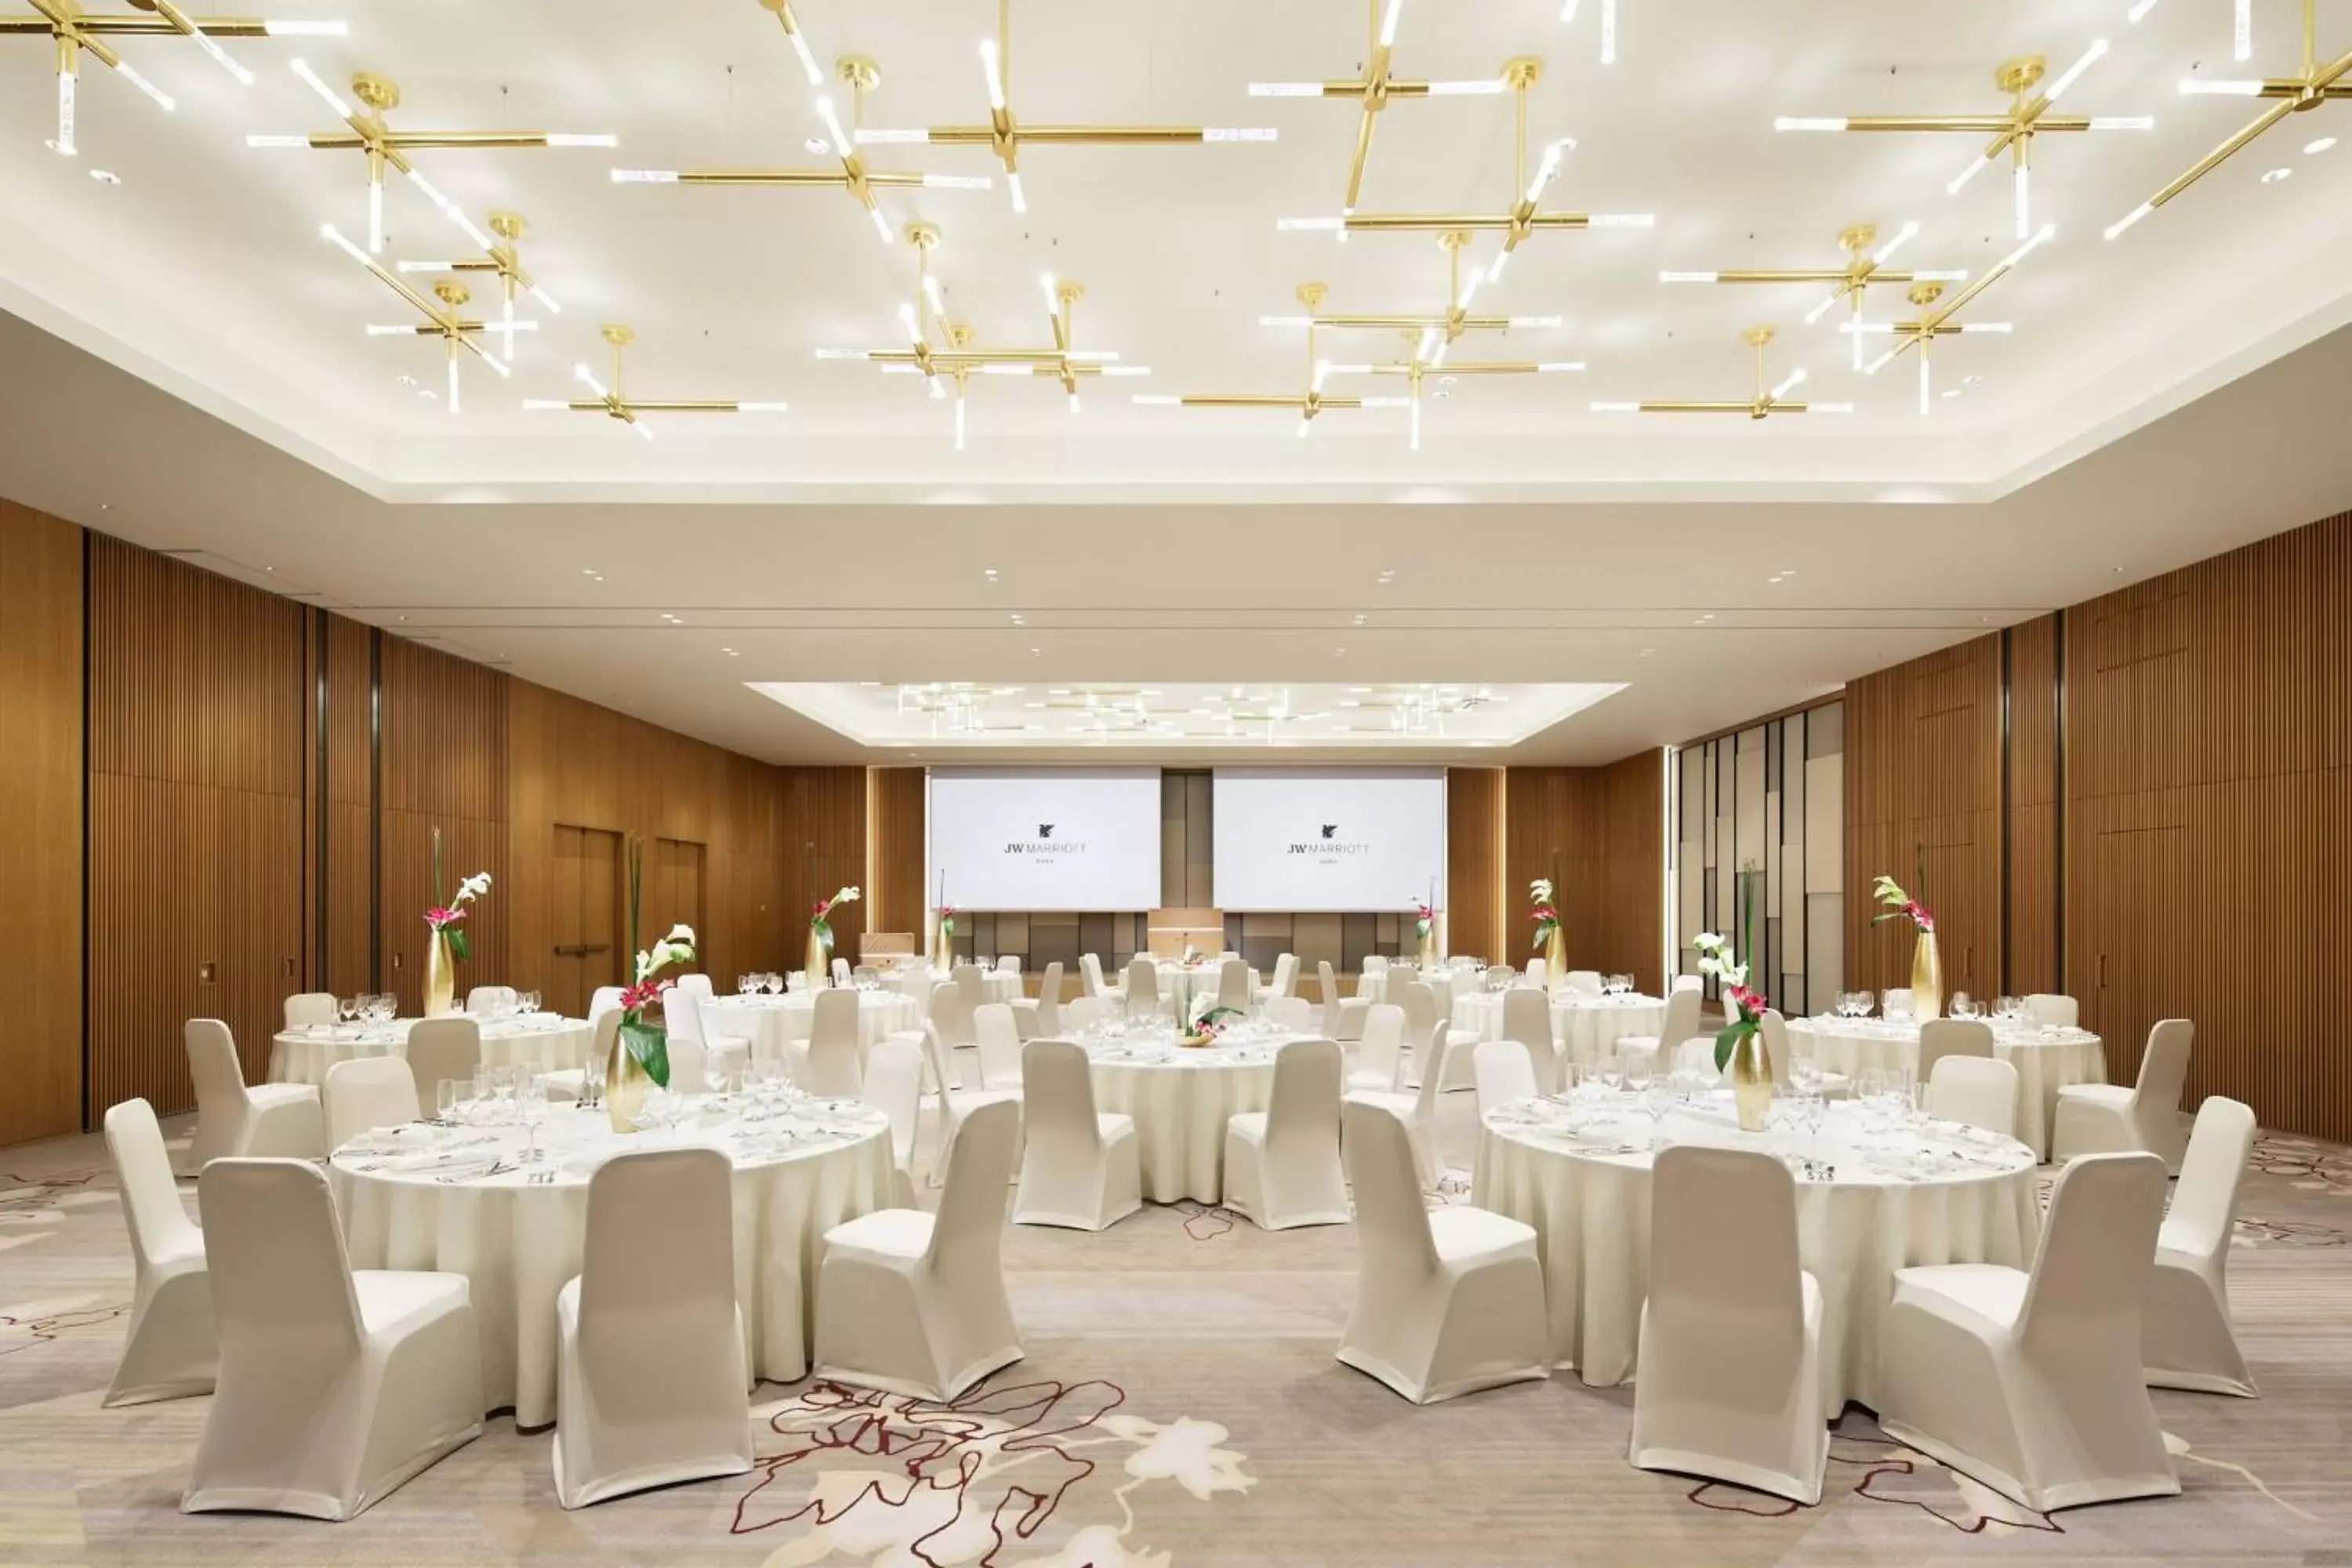 Meeting/conference room, Banquet Facilities in JW Marriott Hotel Nara